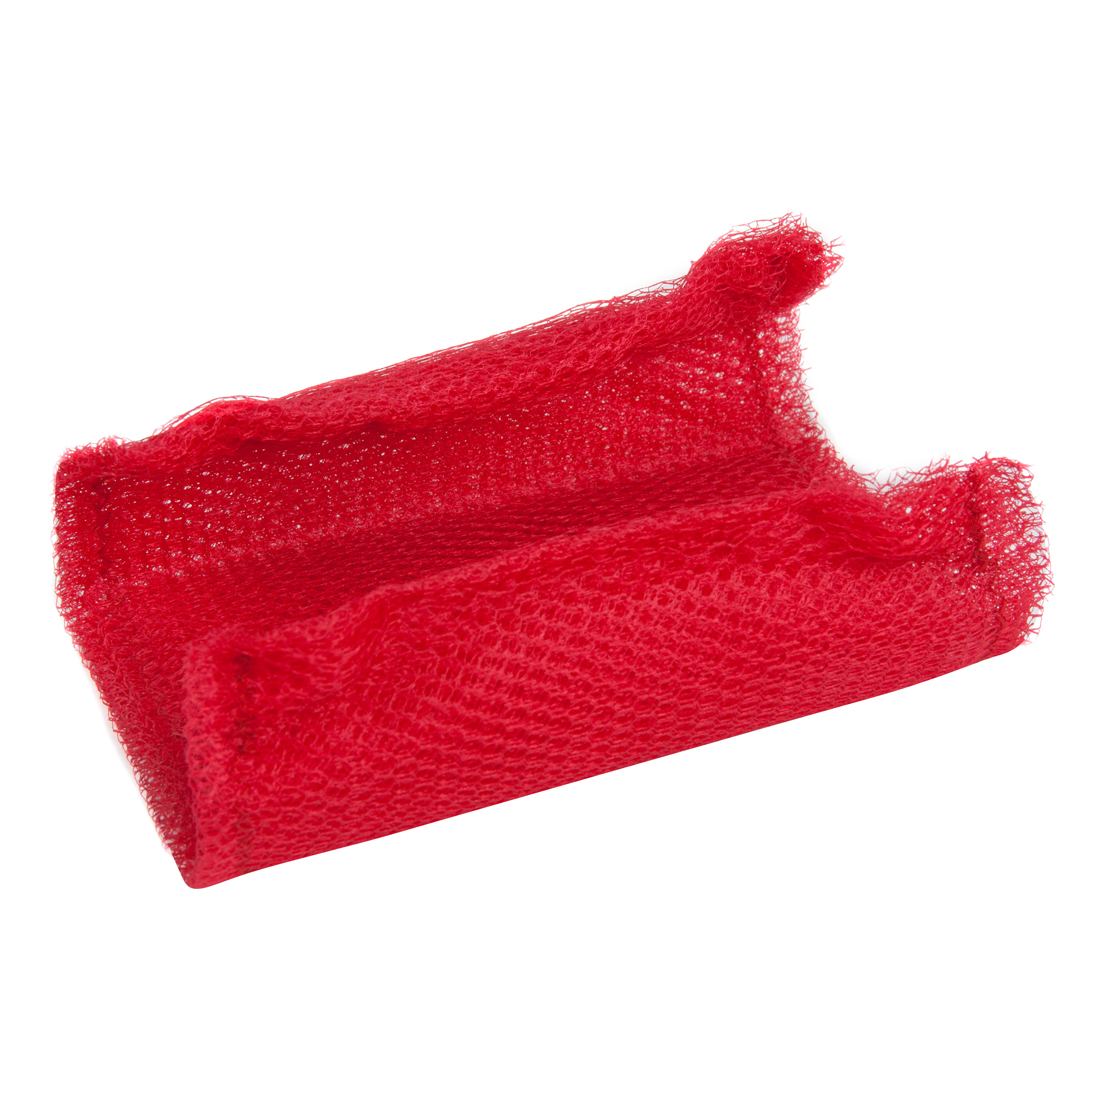 JFlint Nylon Scrubber for Knuckler Pad Holder - Main Product View